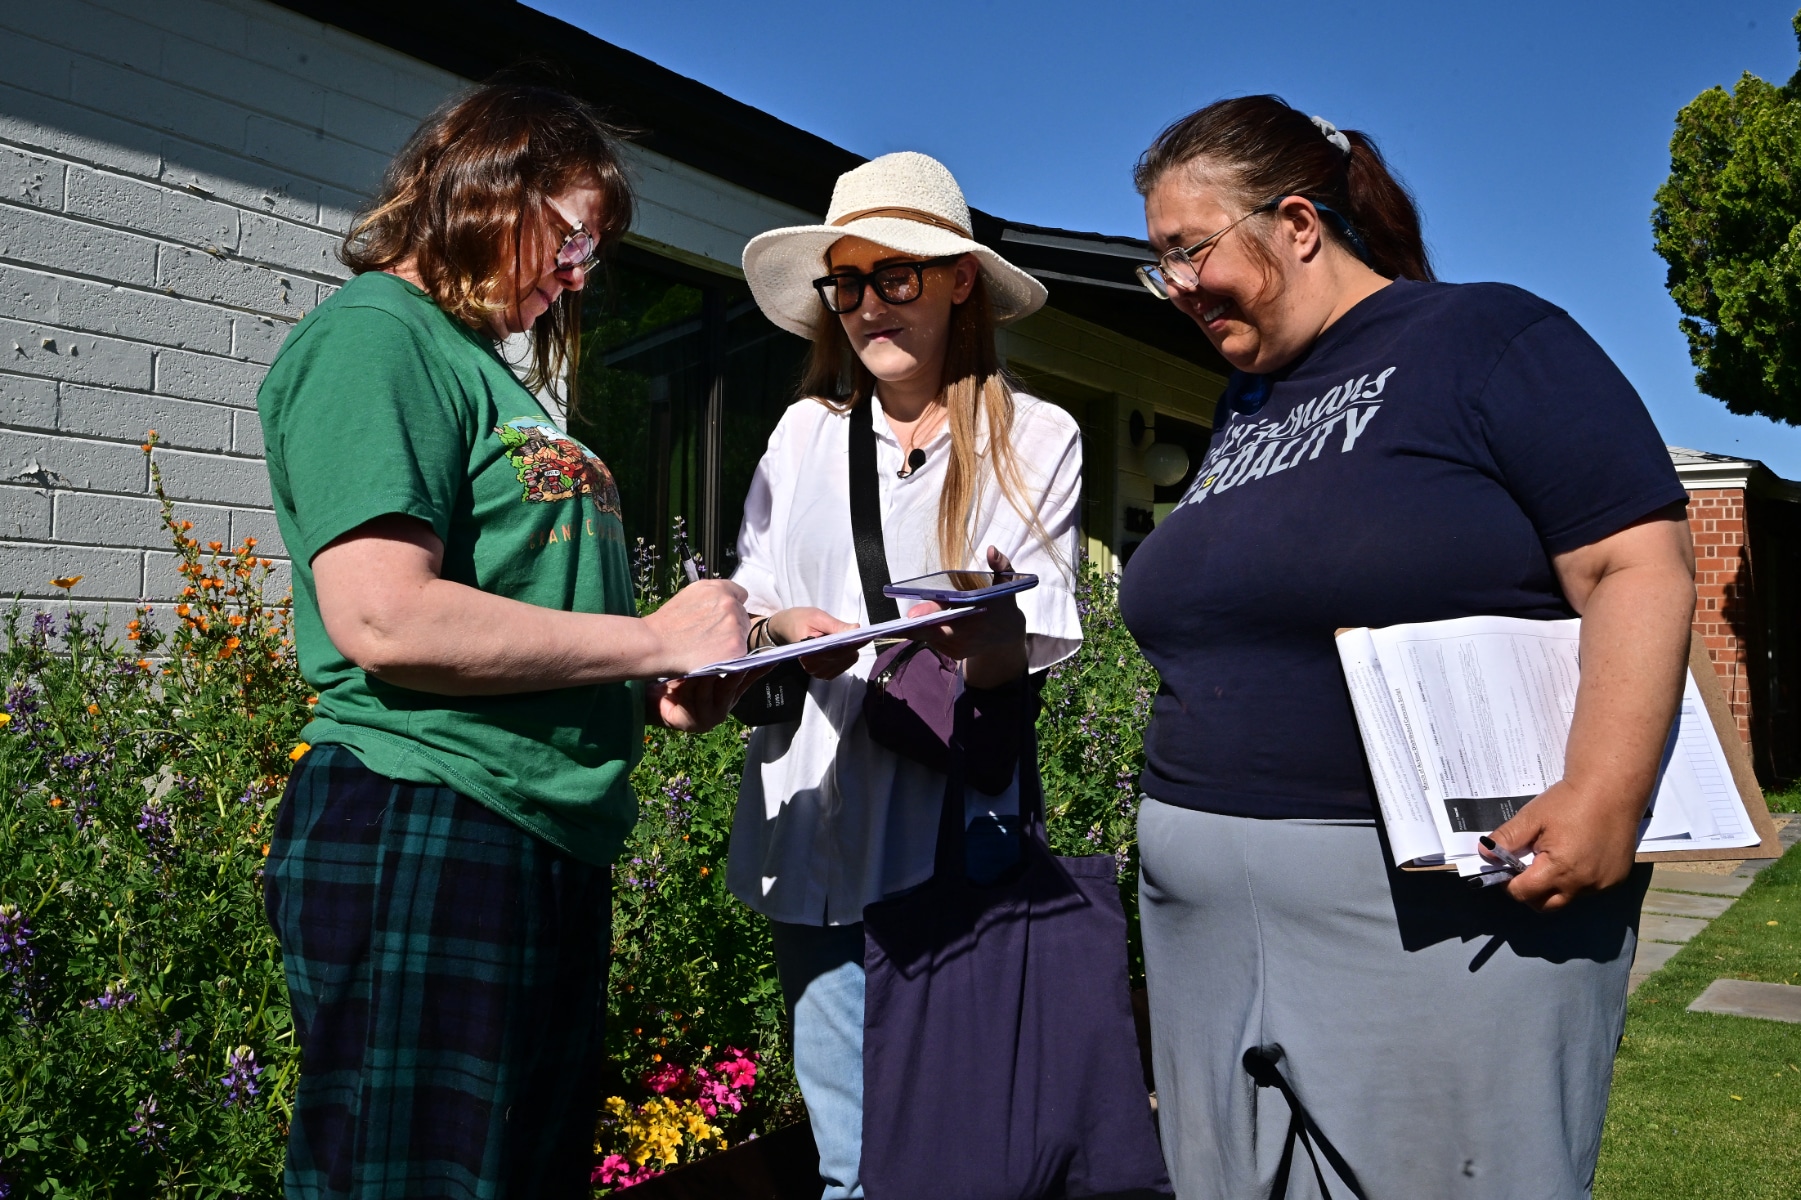 Lucy Meyer, left, signs a paper on a clipboard outside her house as canvassers Liz Grumbach, center, and and Patricia Jones, right, look on